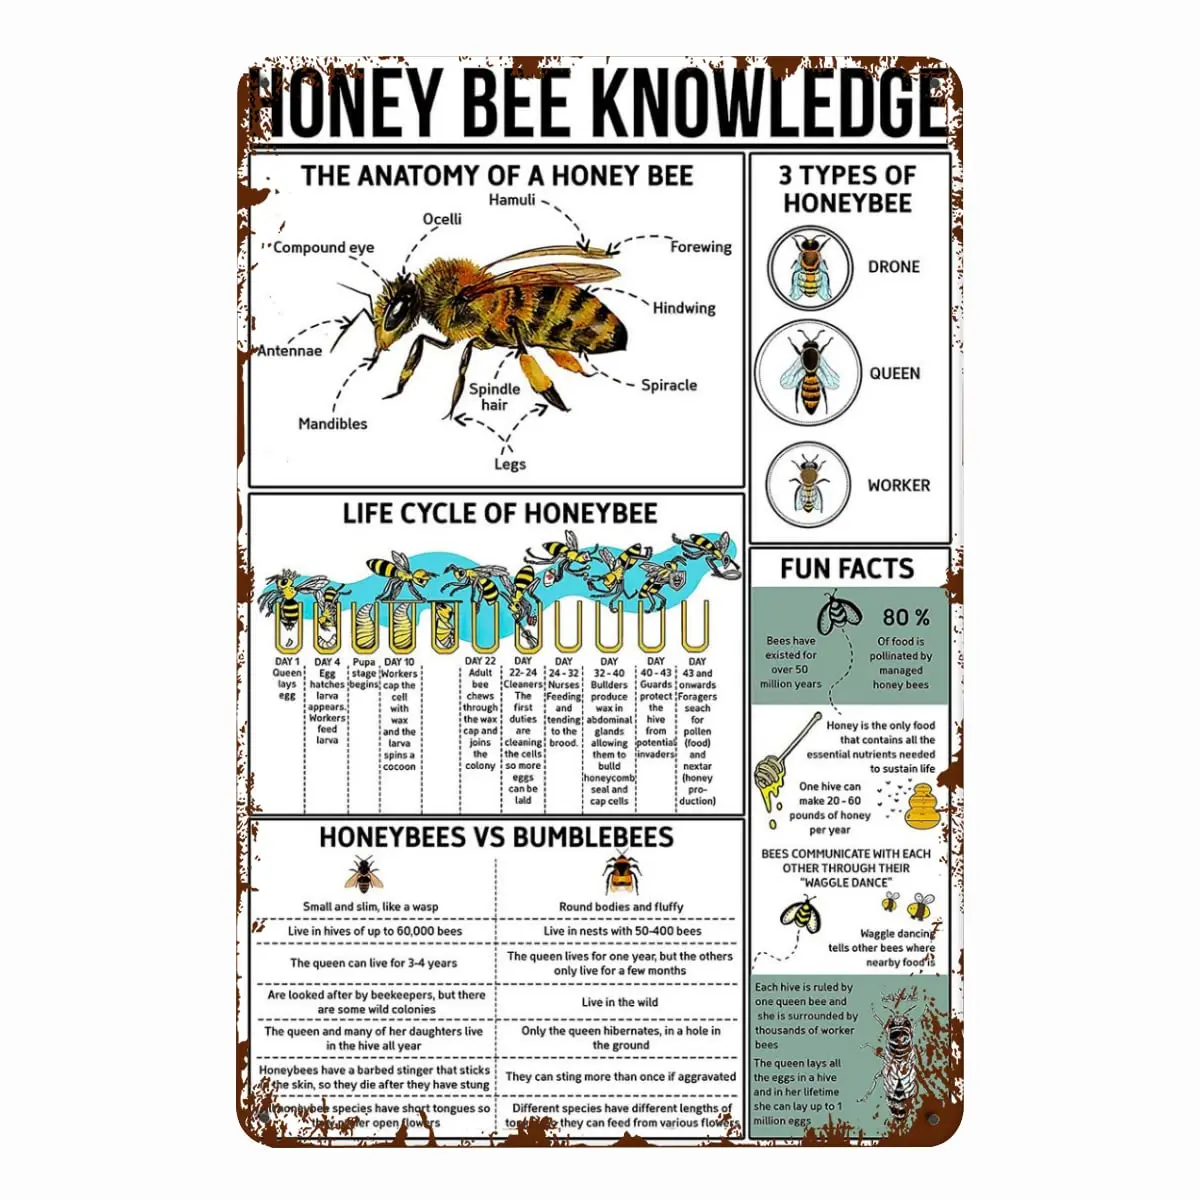 

Vintage Metal Tin Signs Honey Bee Knowledge Metal Sign Home Decor Study Guide For Beekeeper Poster Farm Room Shop Club Wall Deco